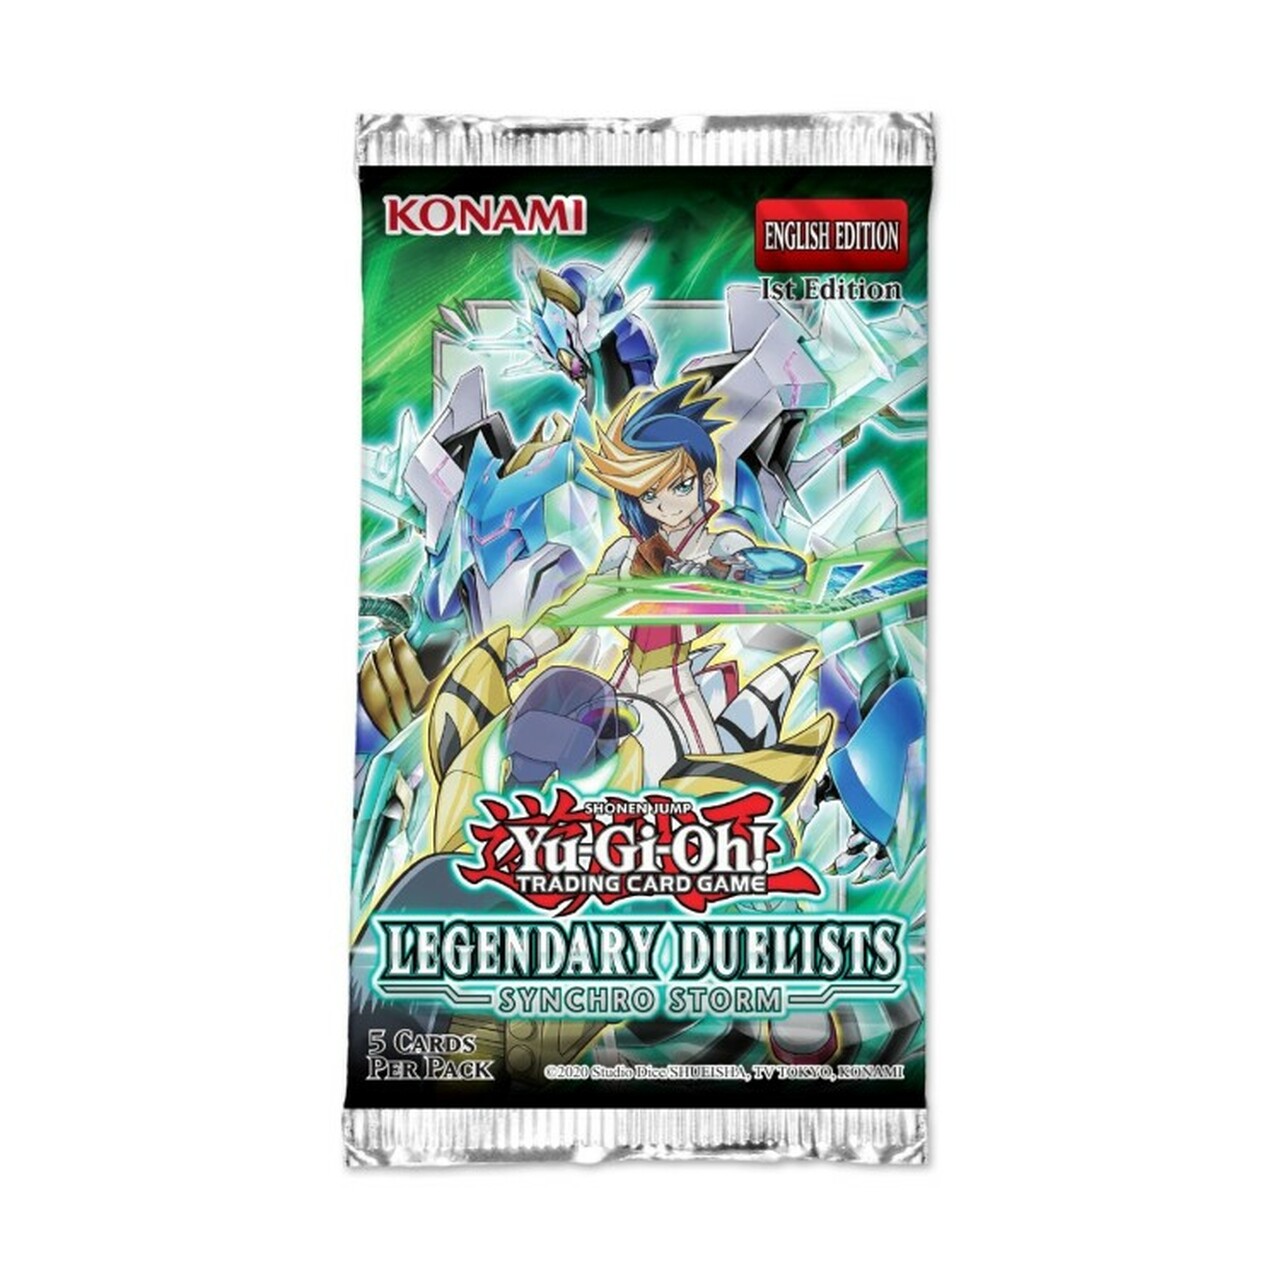 YGO: LEGENDARY DUELISTS: SYNCHRO STORM BOOSTER PACK | BD Cosmos